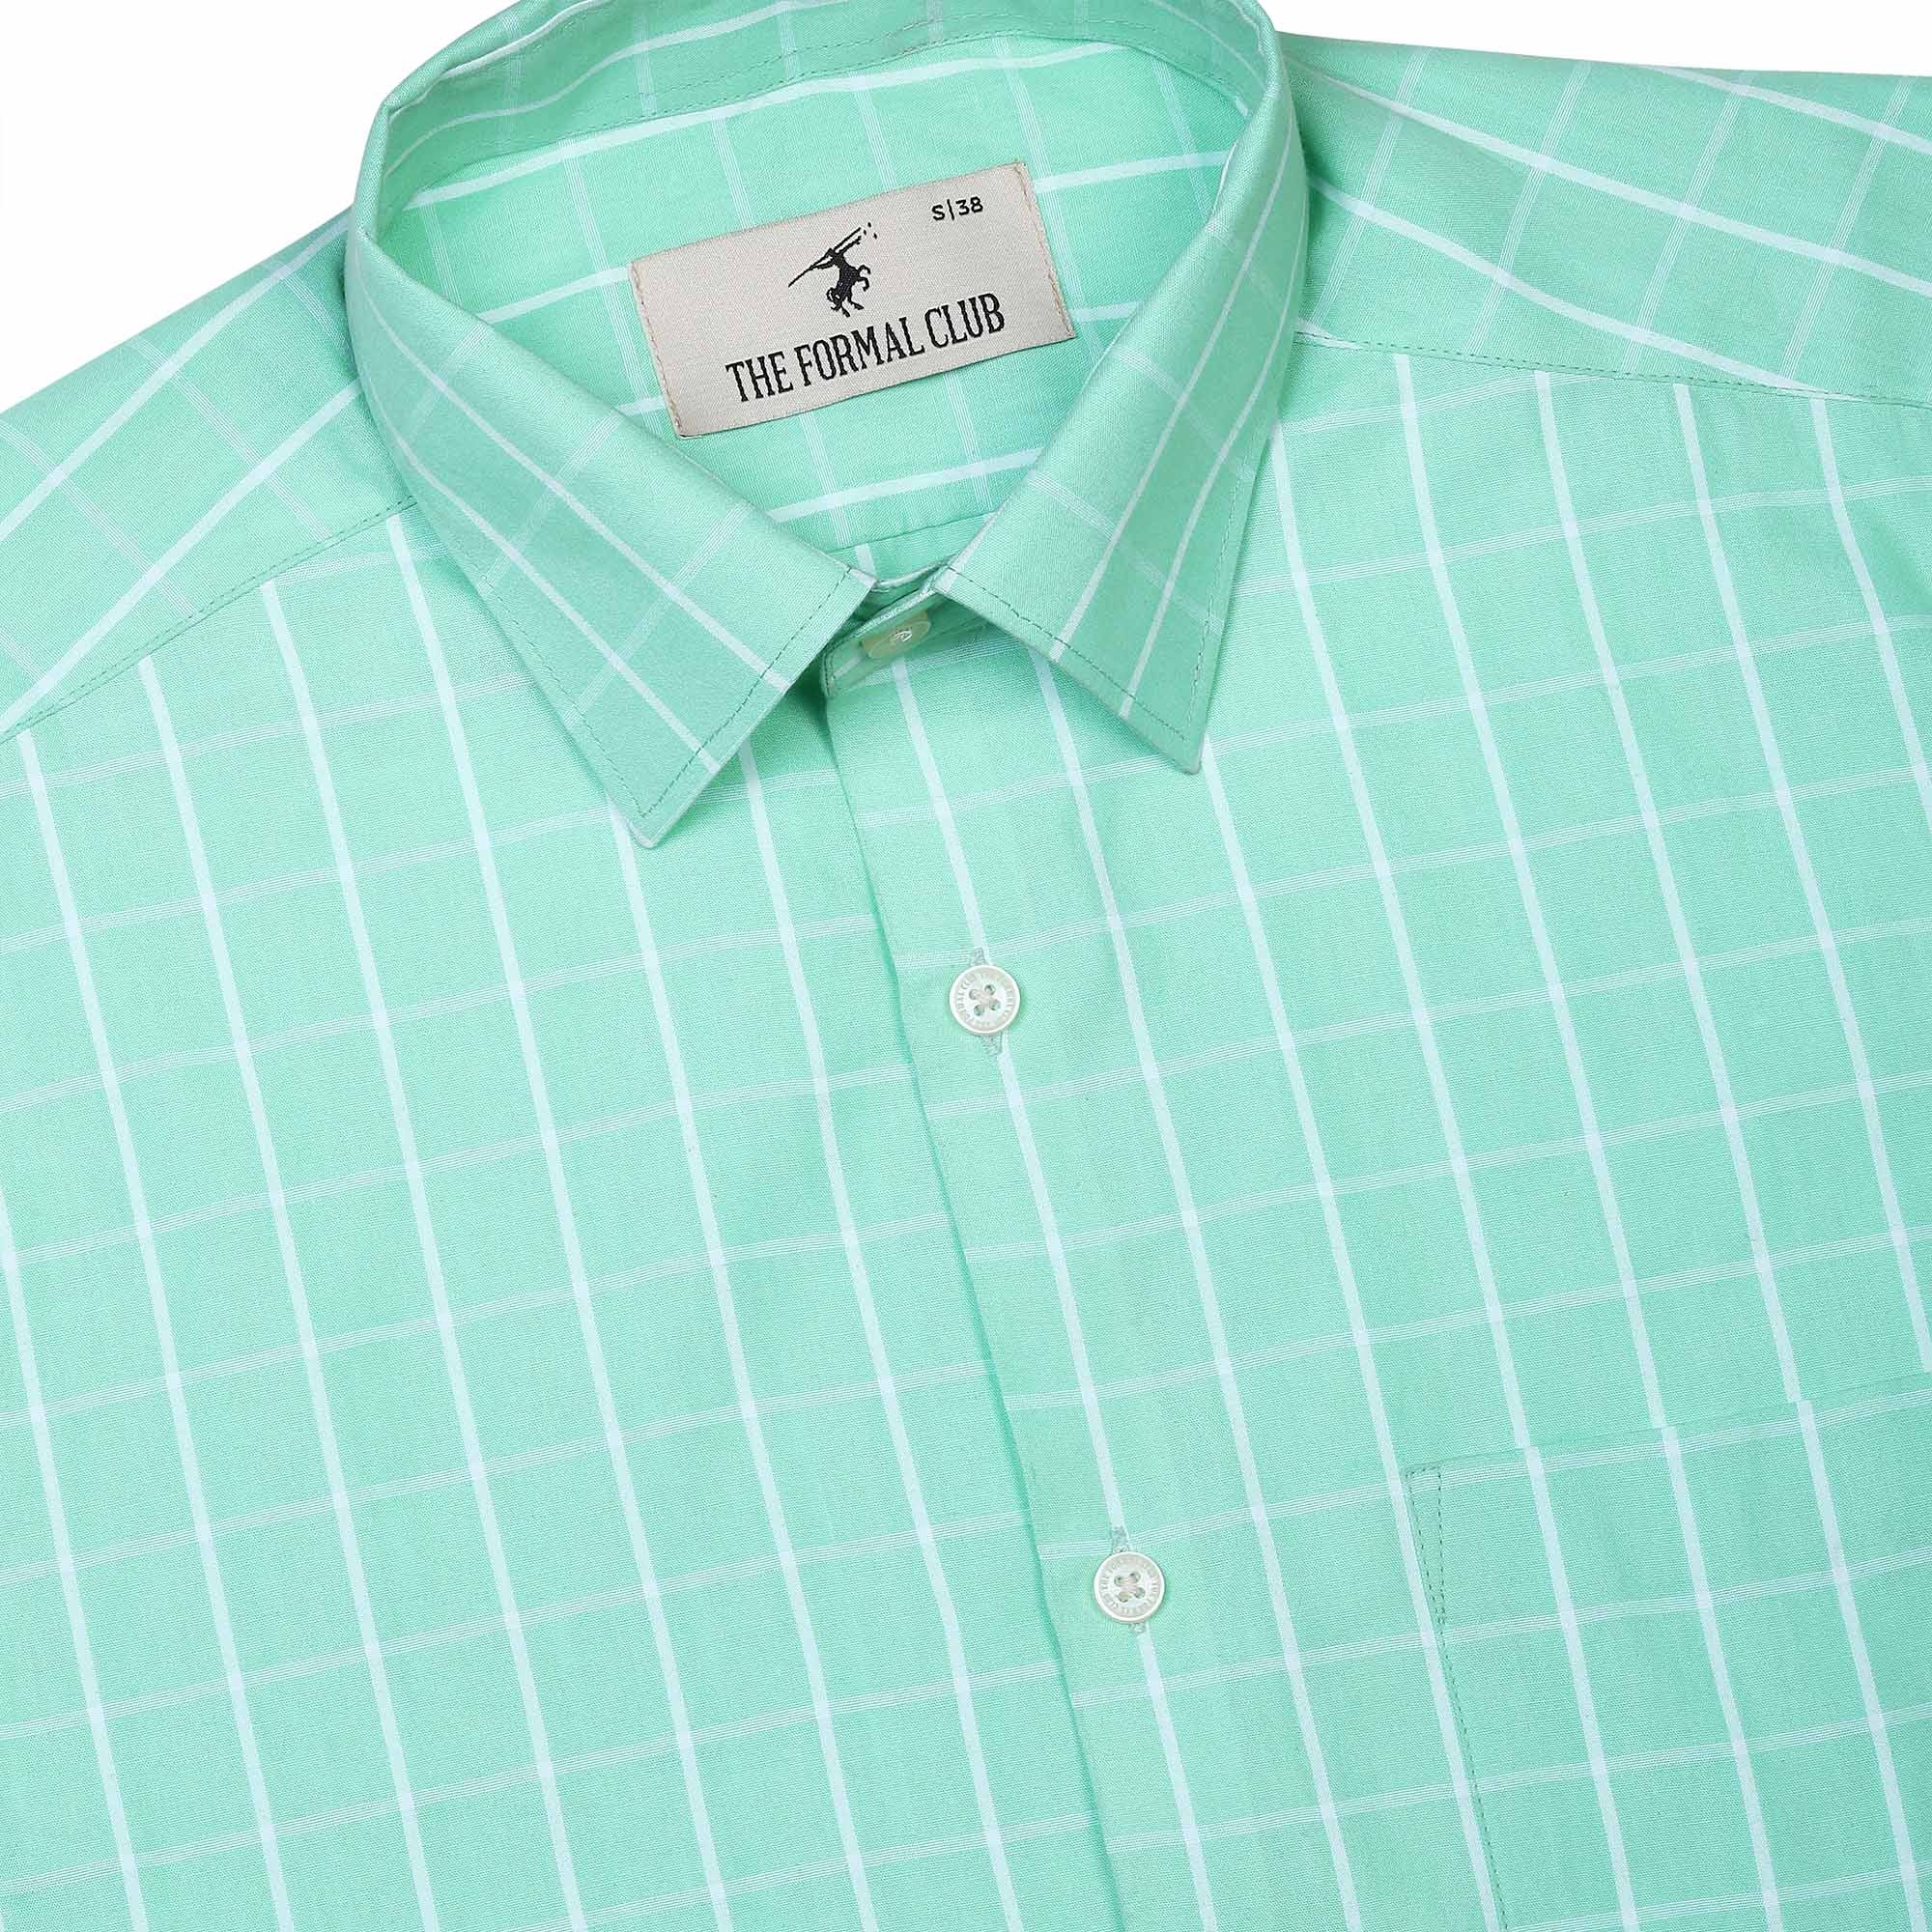 Metro Yarn Died Check Shirt In Pistachio - The Formal Club